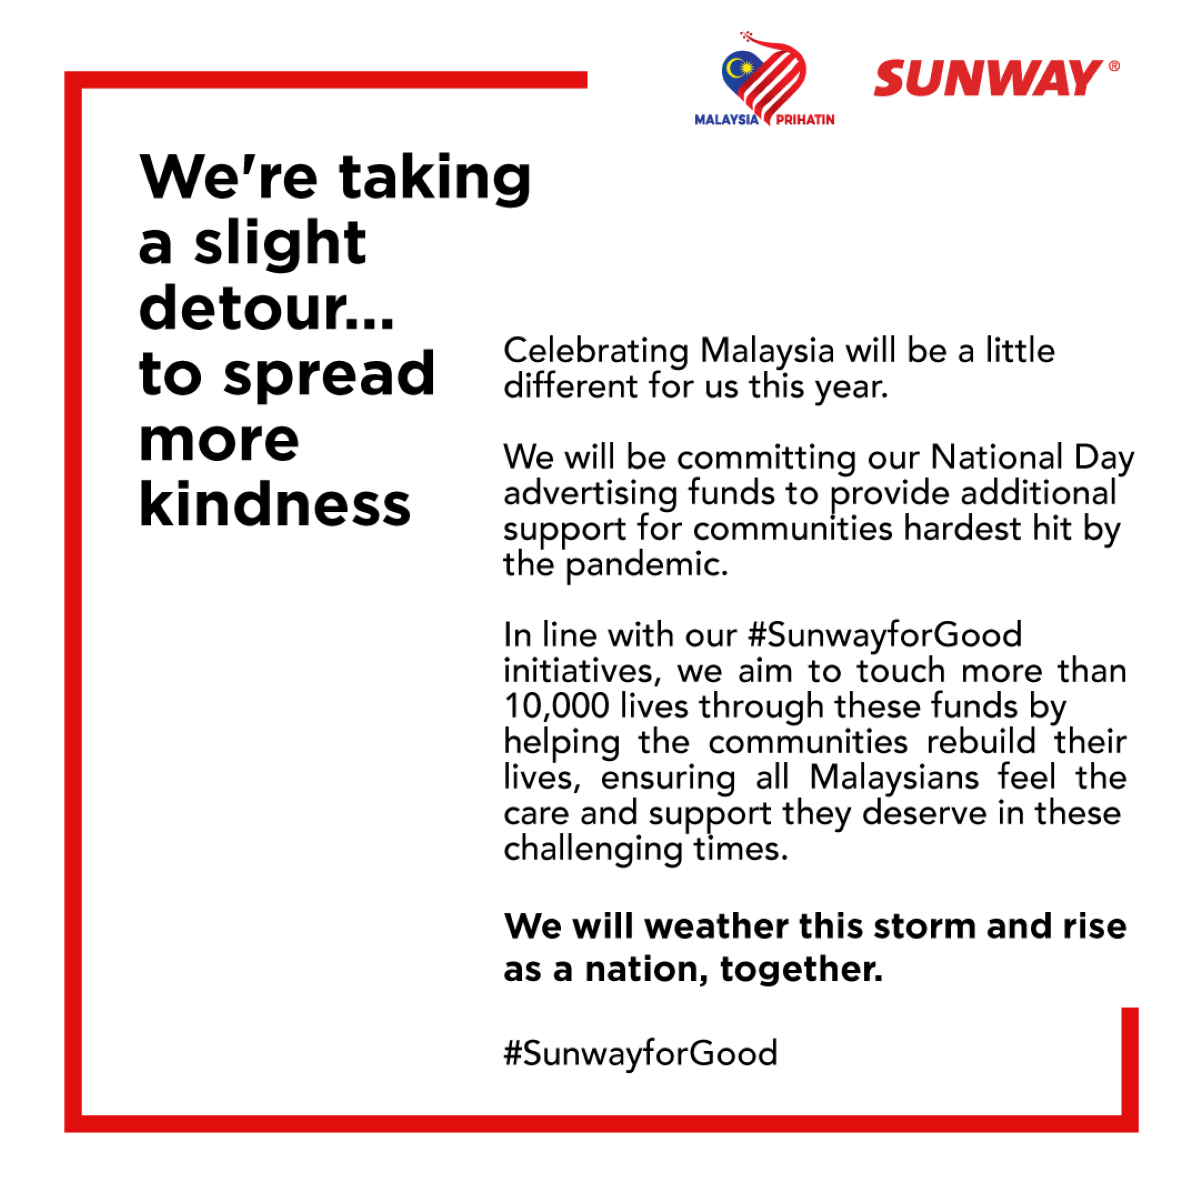 Simple visual of Sunway National Day pledge. With simple text, redlines, Sunway logo, and Malaysia Prihatin logo.